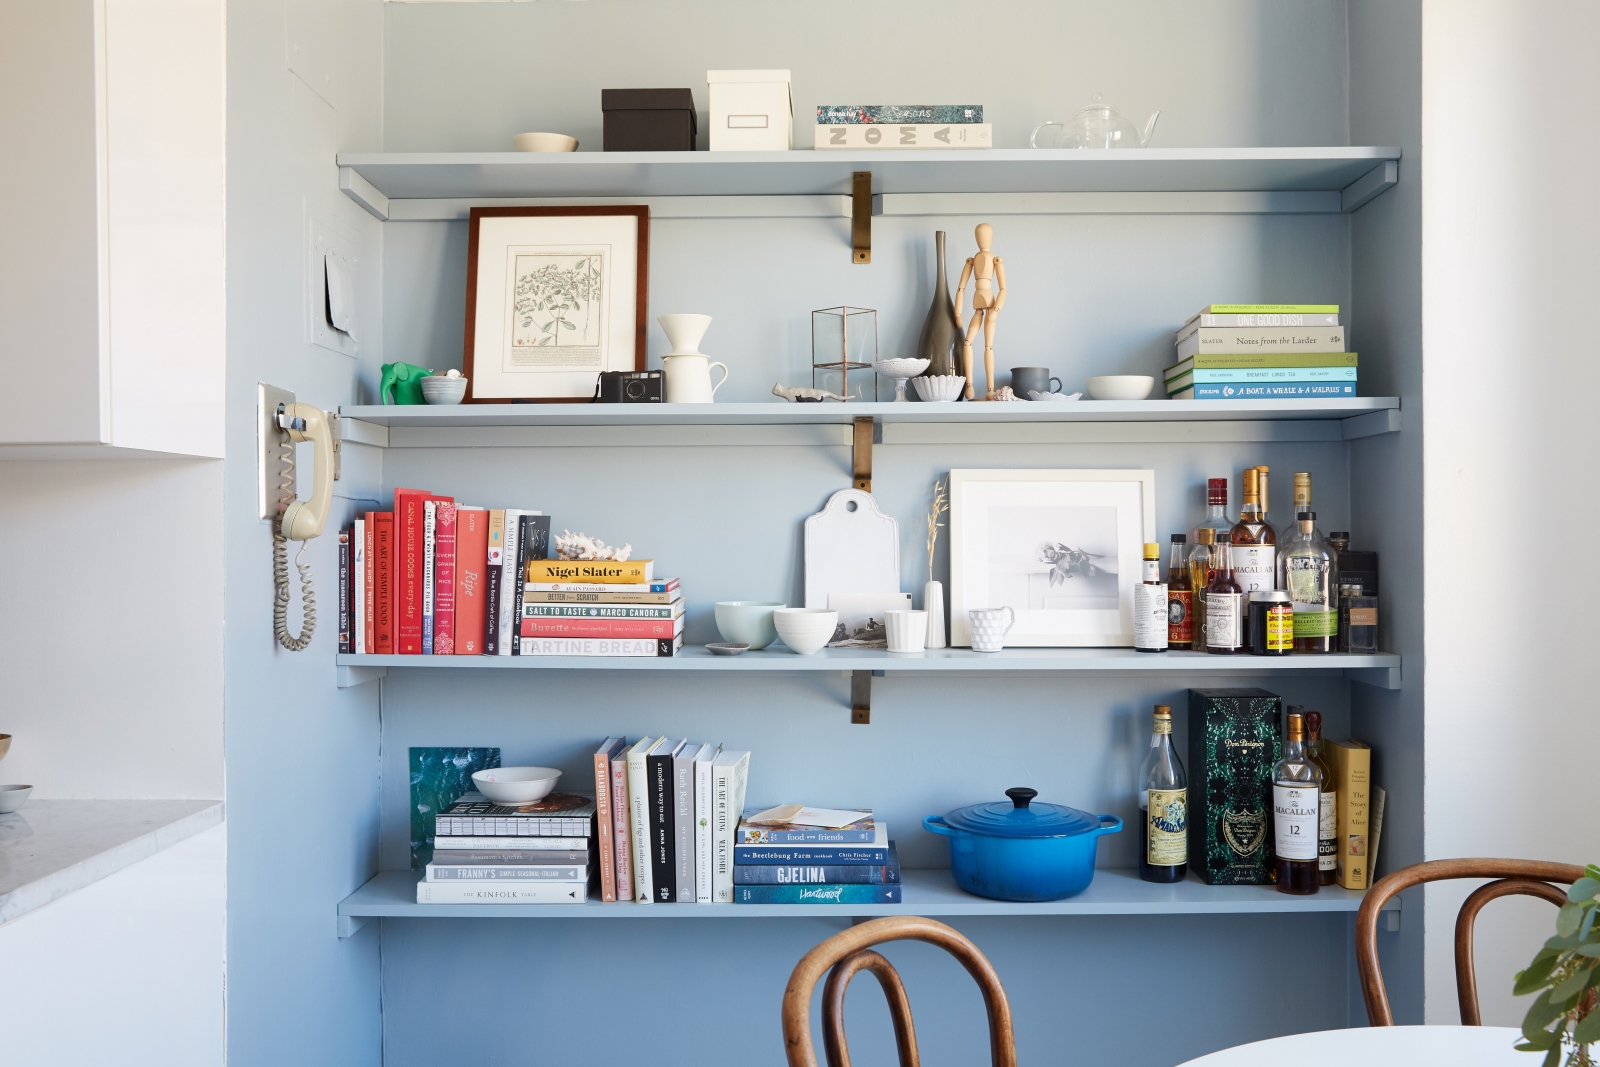 image: How to Style Open Kitchen Shelves